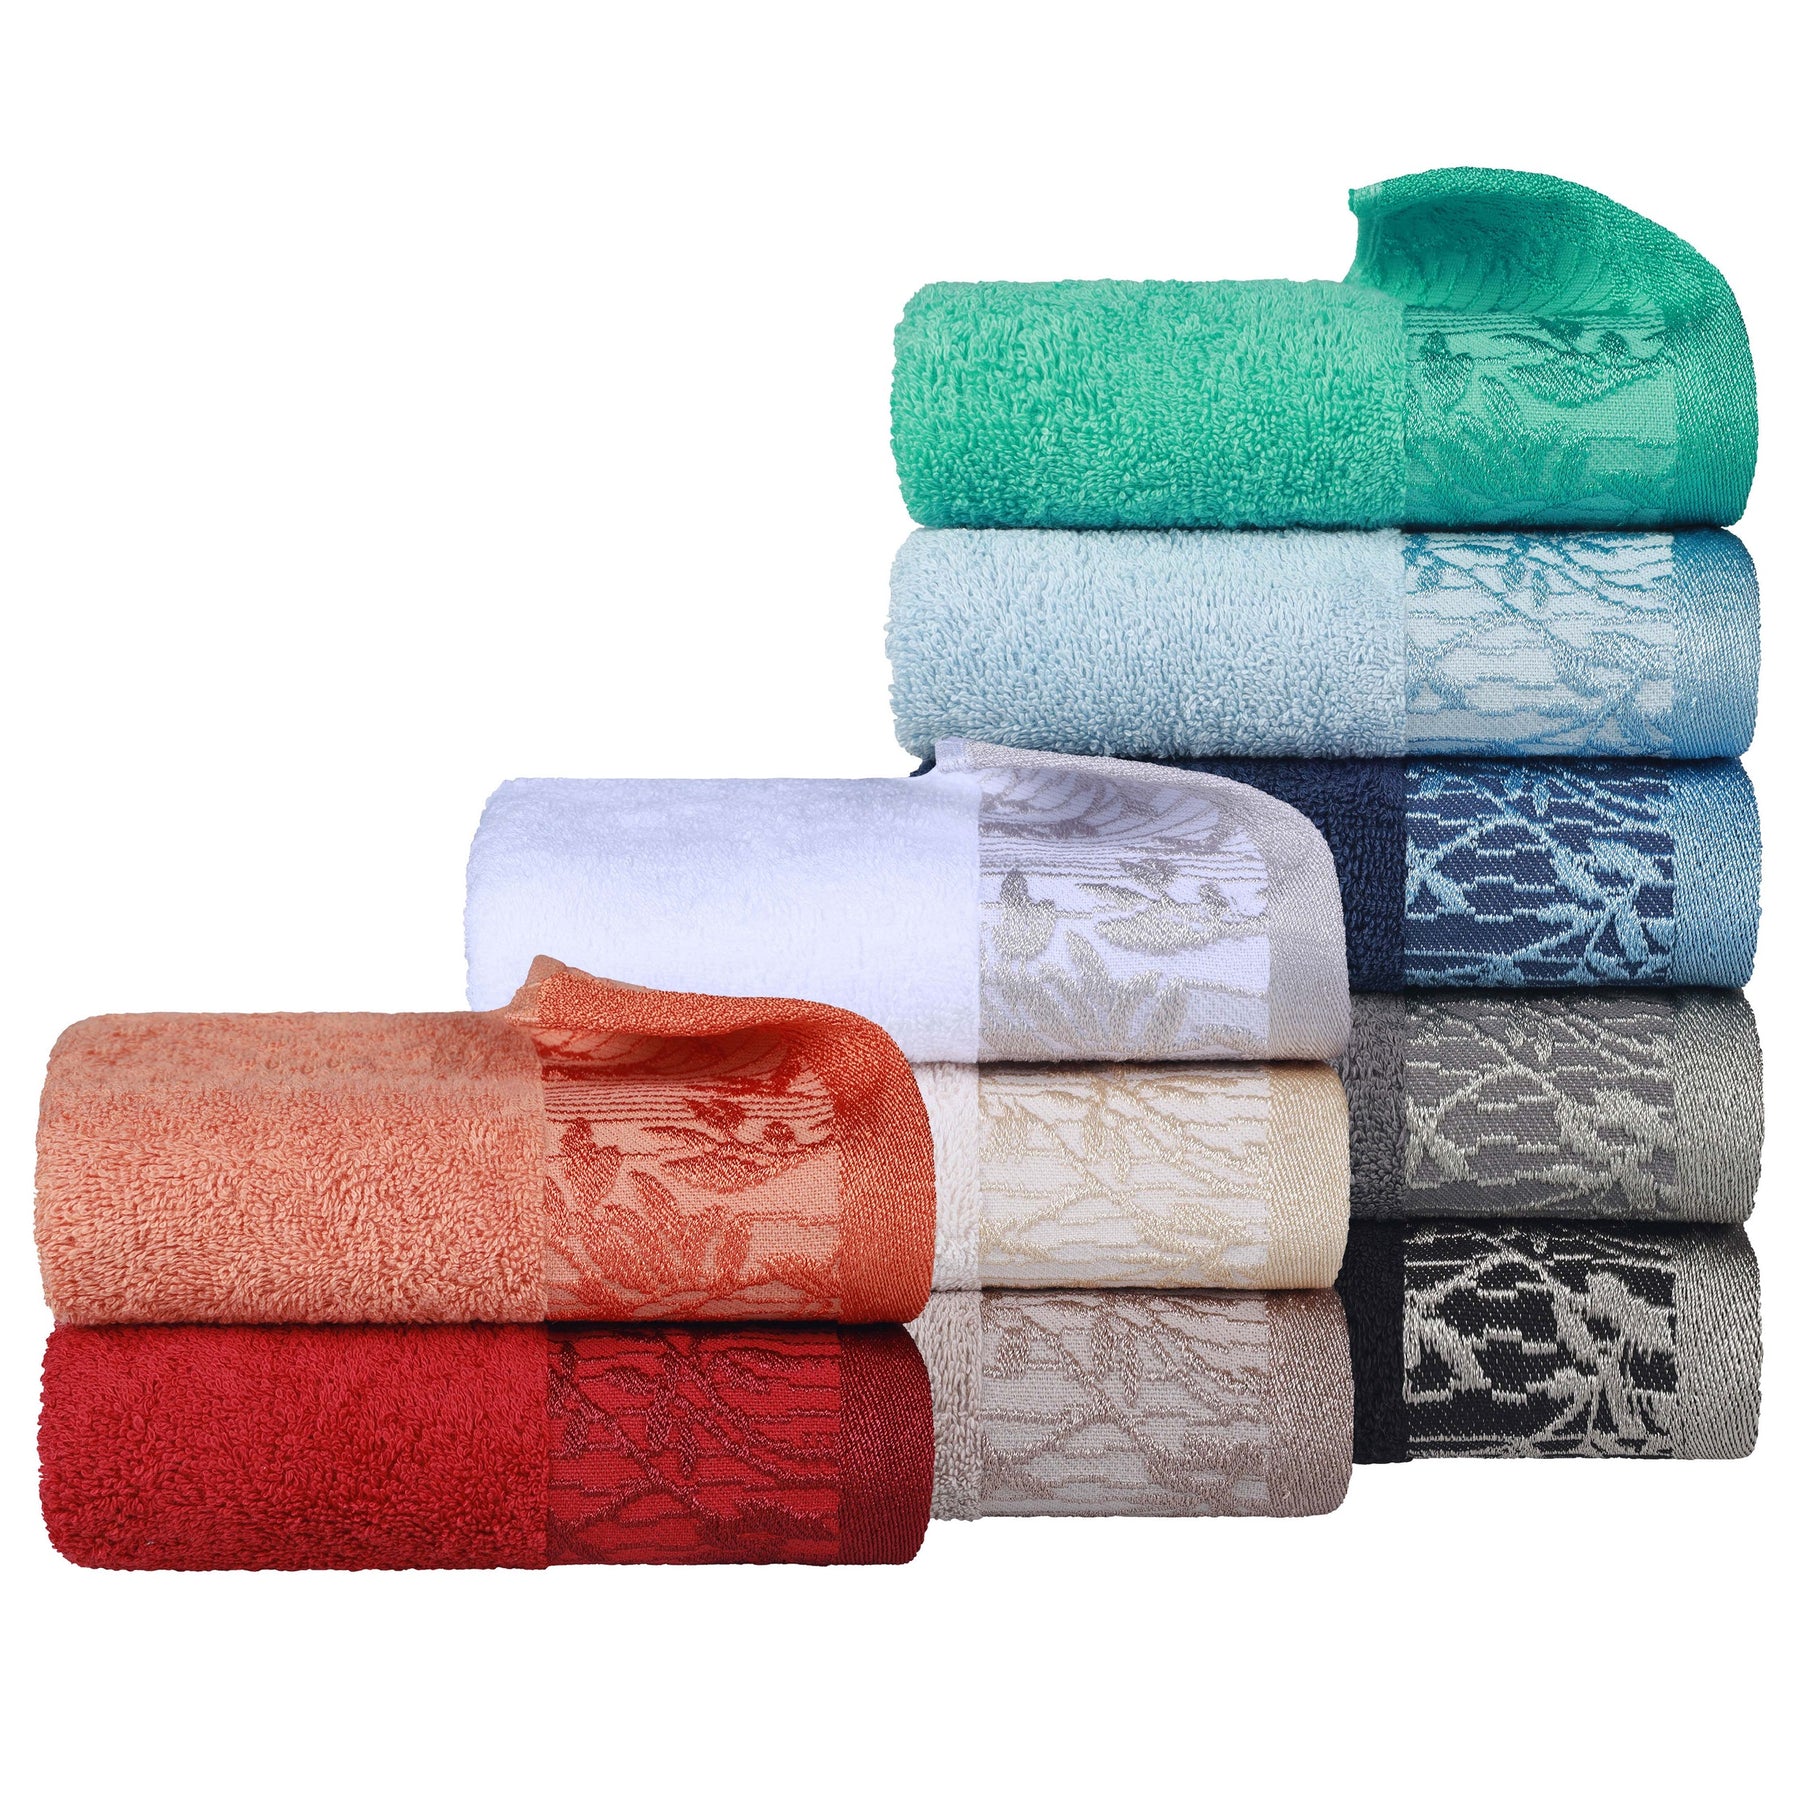 Wisteria Cotton Floral Embroidered Jacquard Border Bath Towel - Turquoise